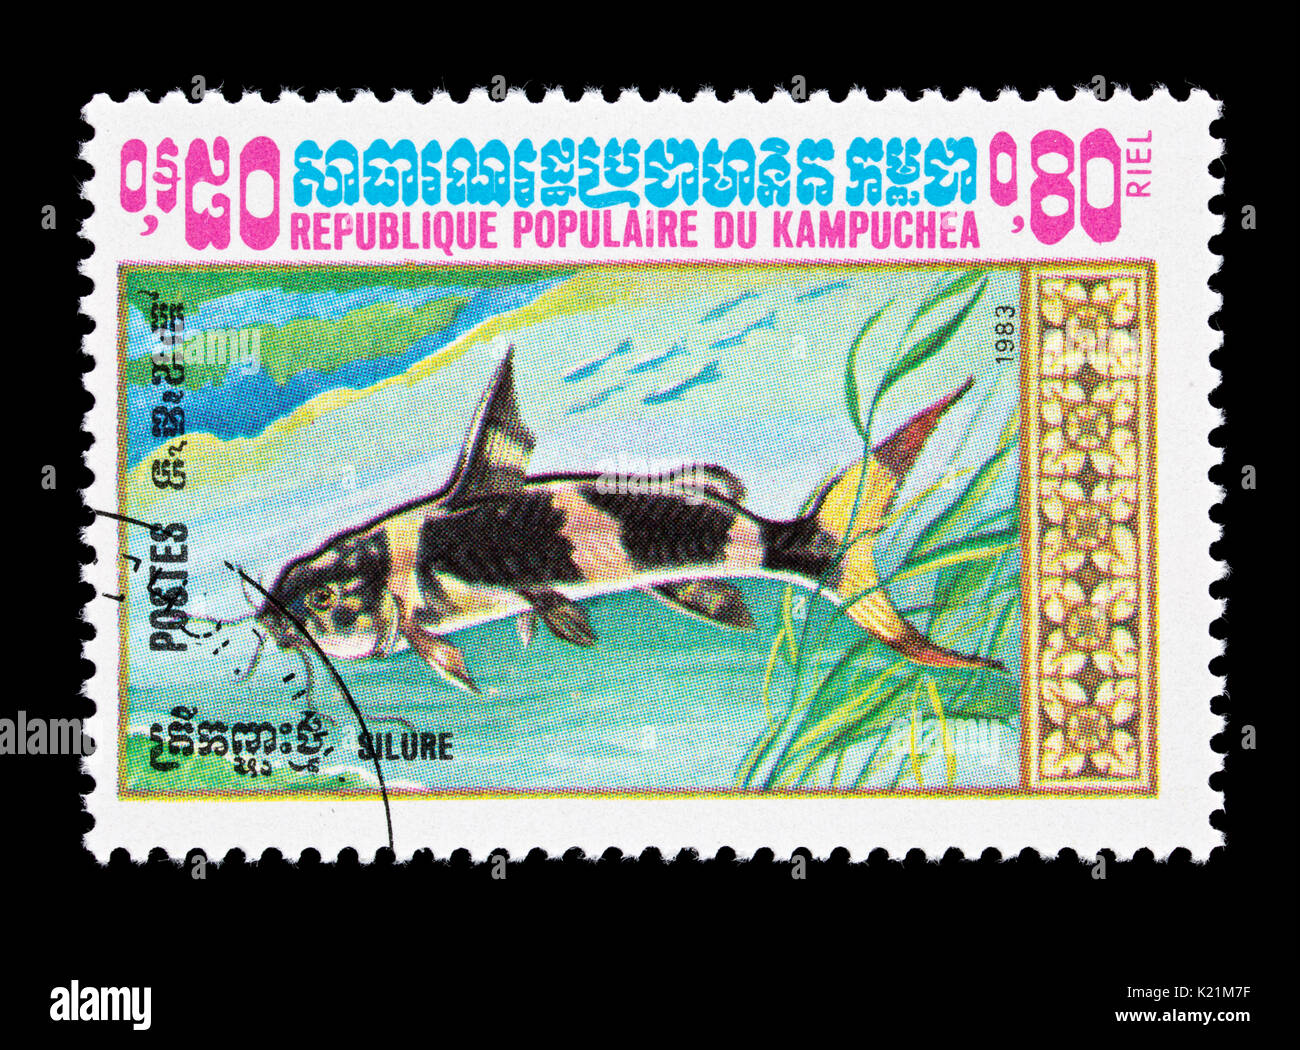 Postage stamp from Cambodia (Kampuchea) depicting a catfish fish species. Stock Photo